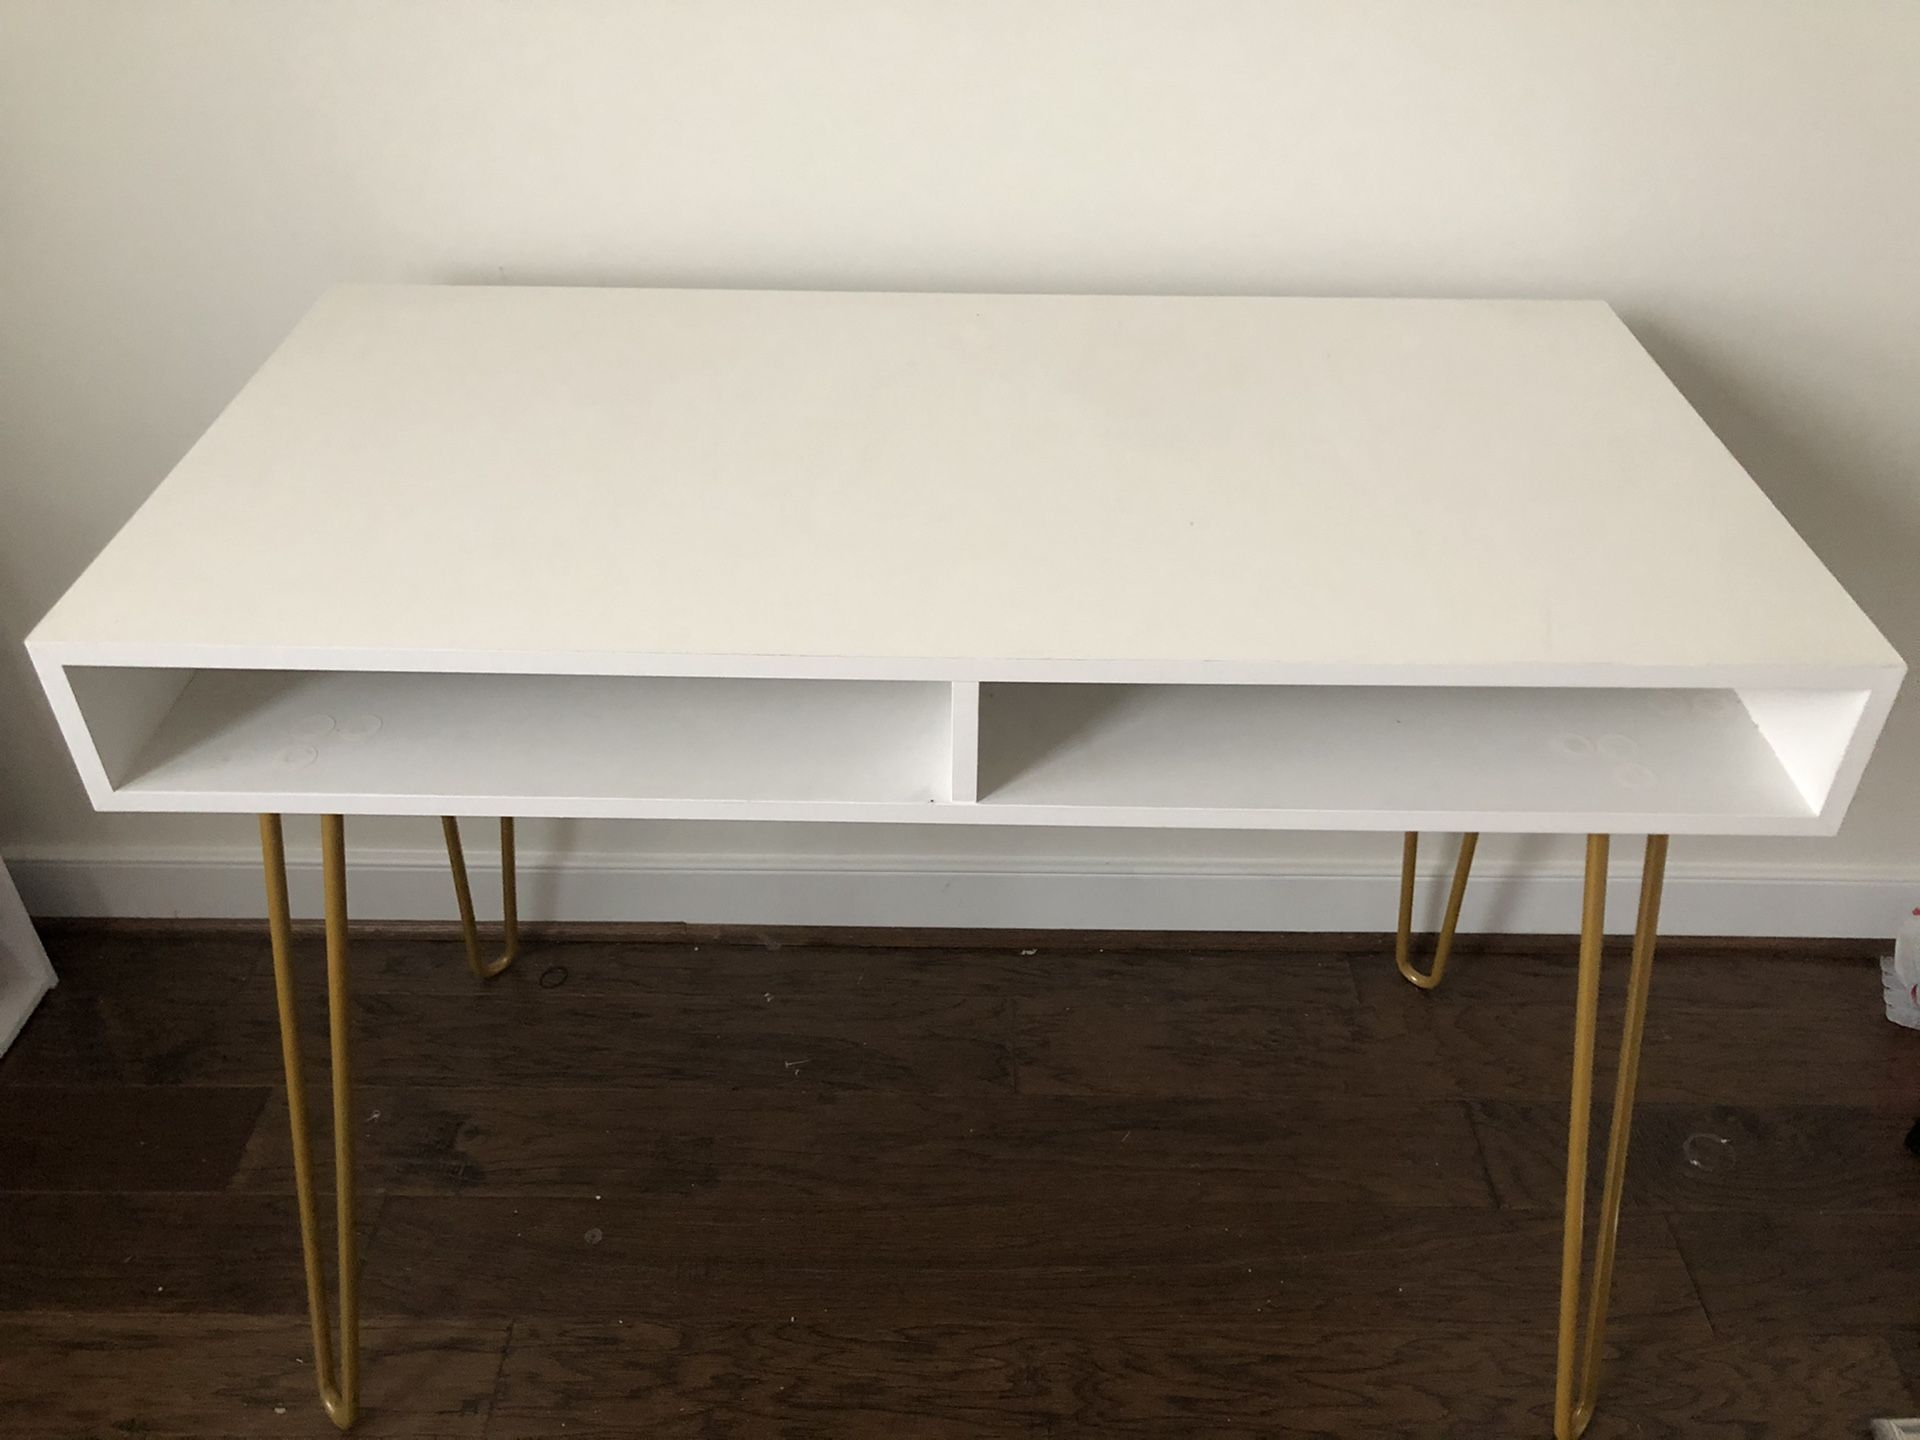 White desk with gold pin legs